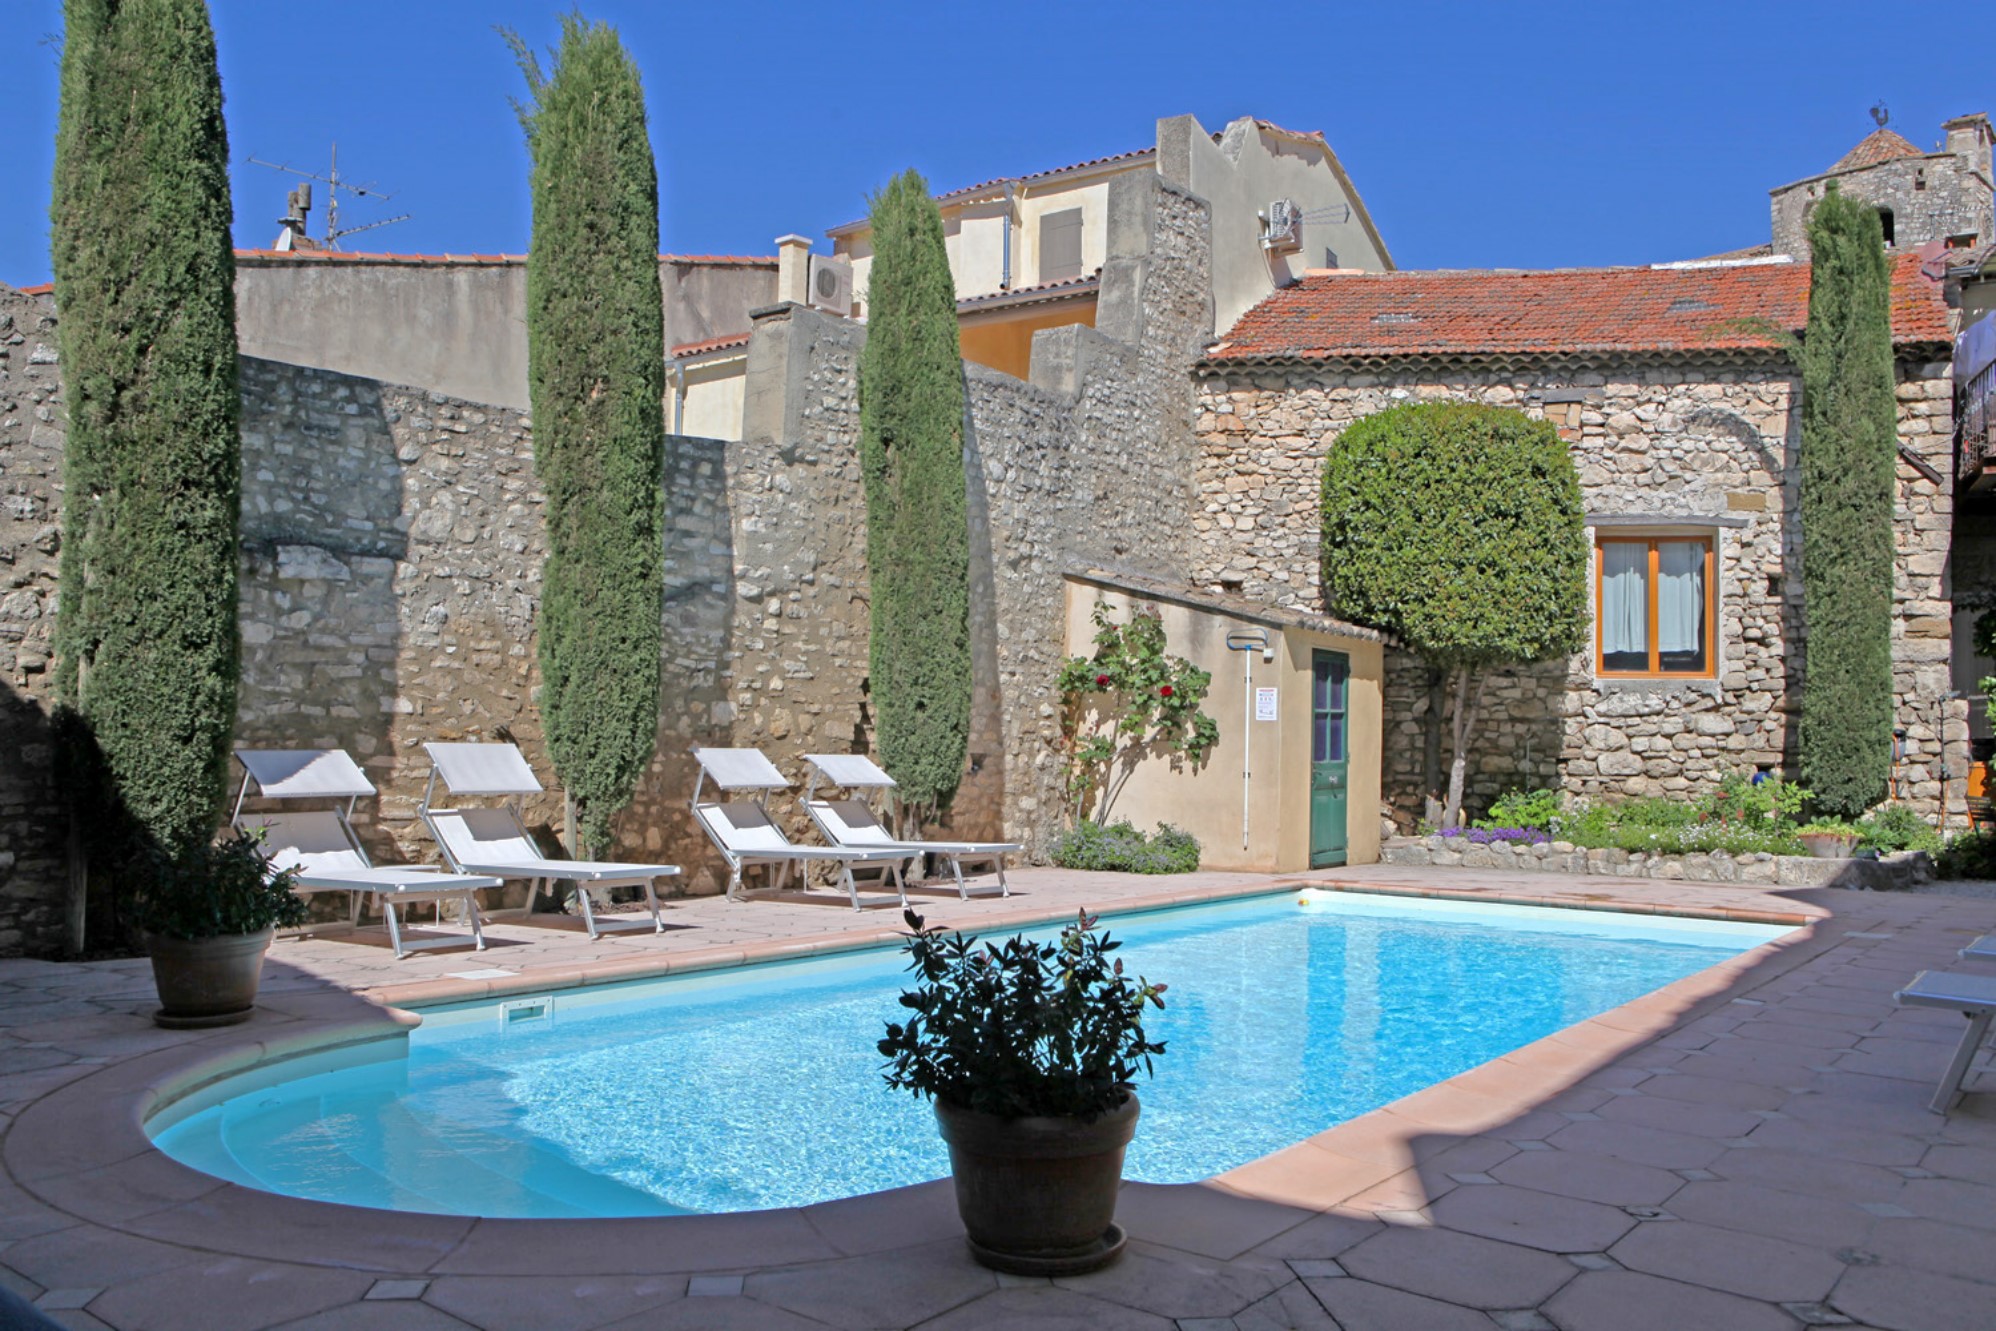 For sale close to Luberon, beautiful property consisting of several buildings, with landscaped garden and pool